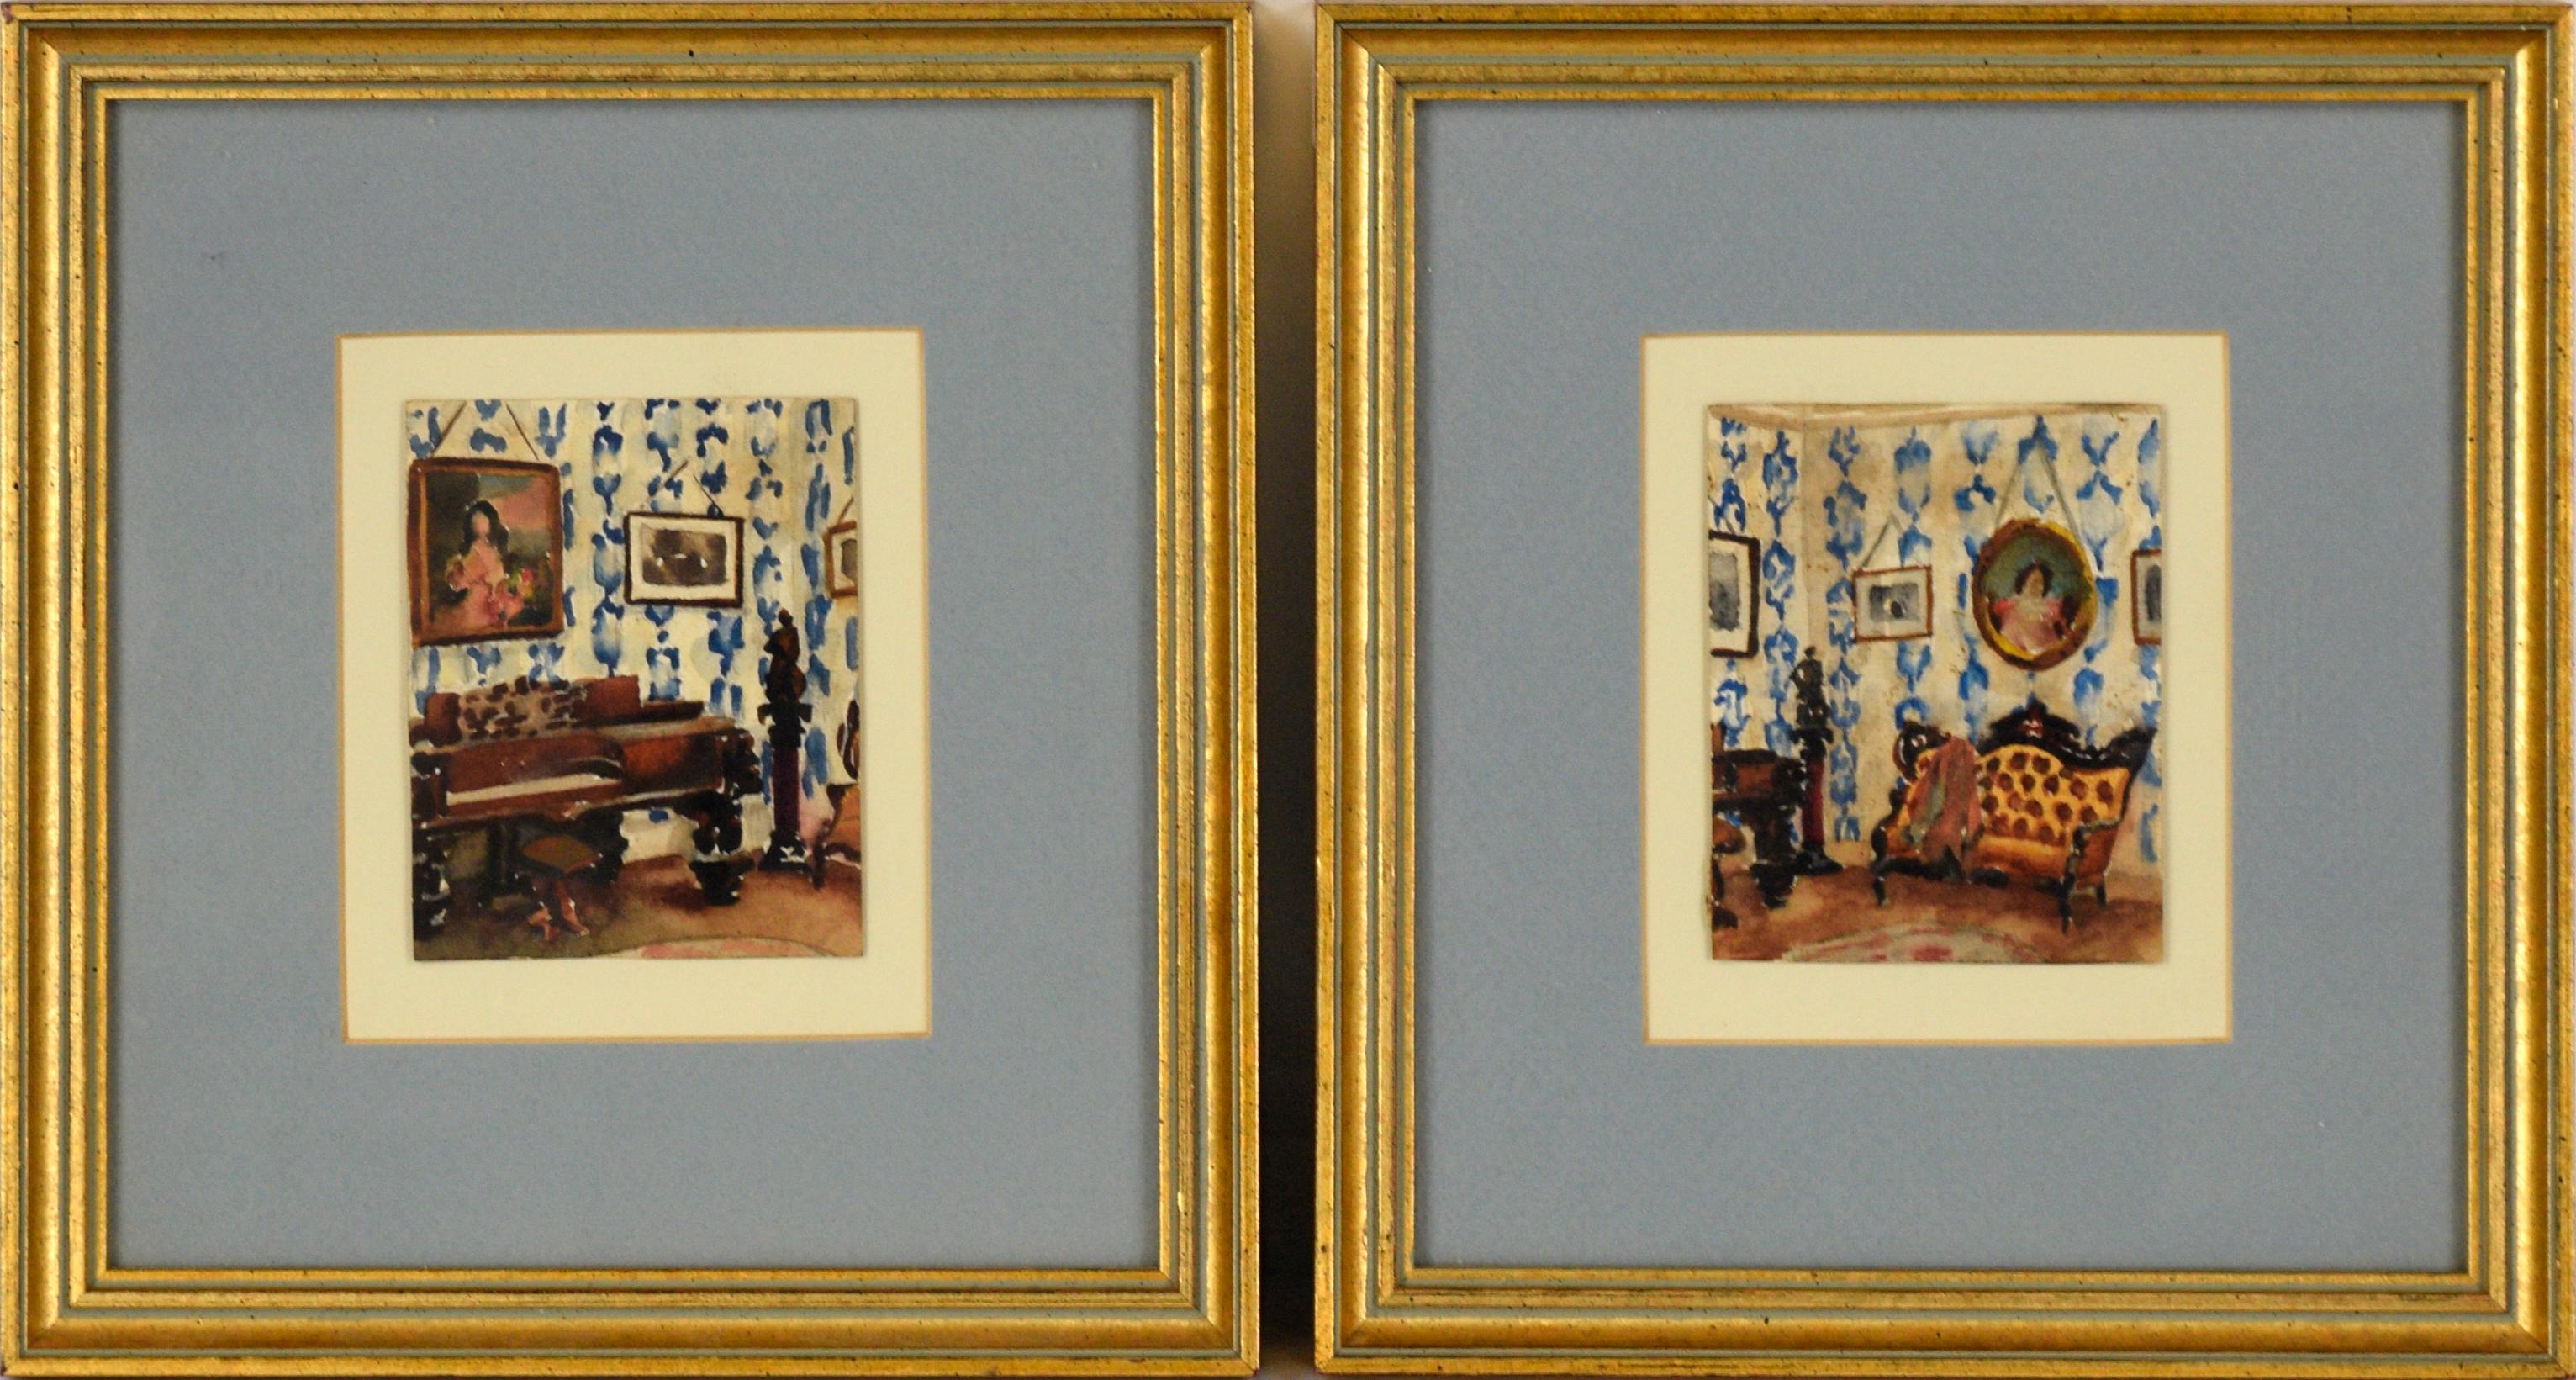 Pair of Interior Scenes of a Victorian Home - Watercolor on Heavy Paper